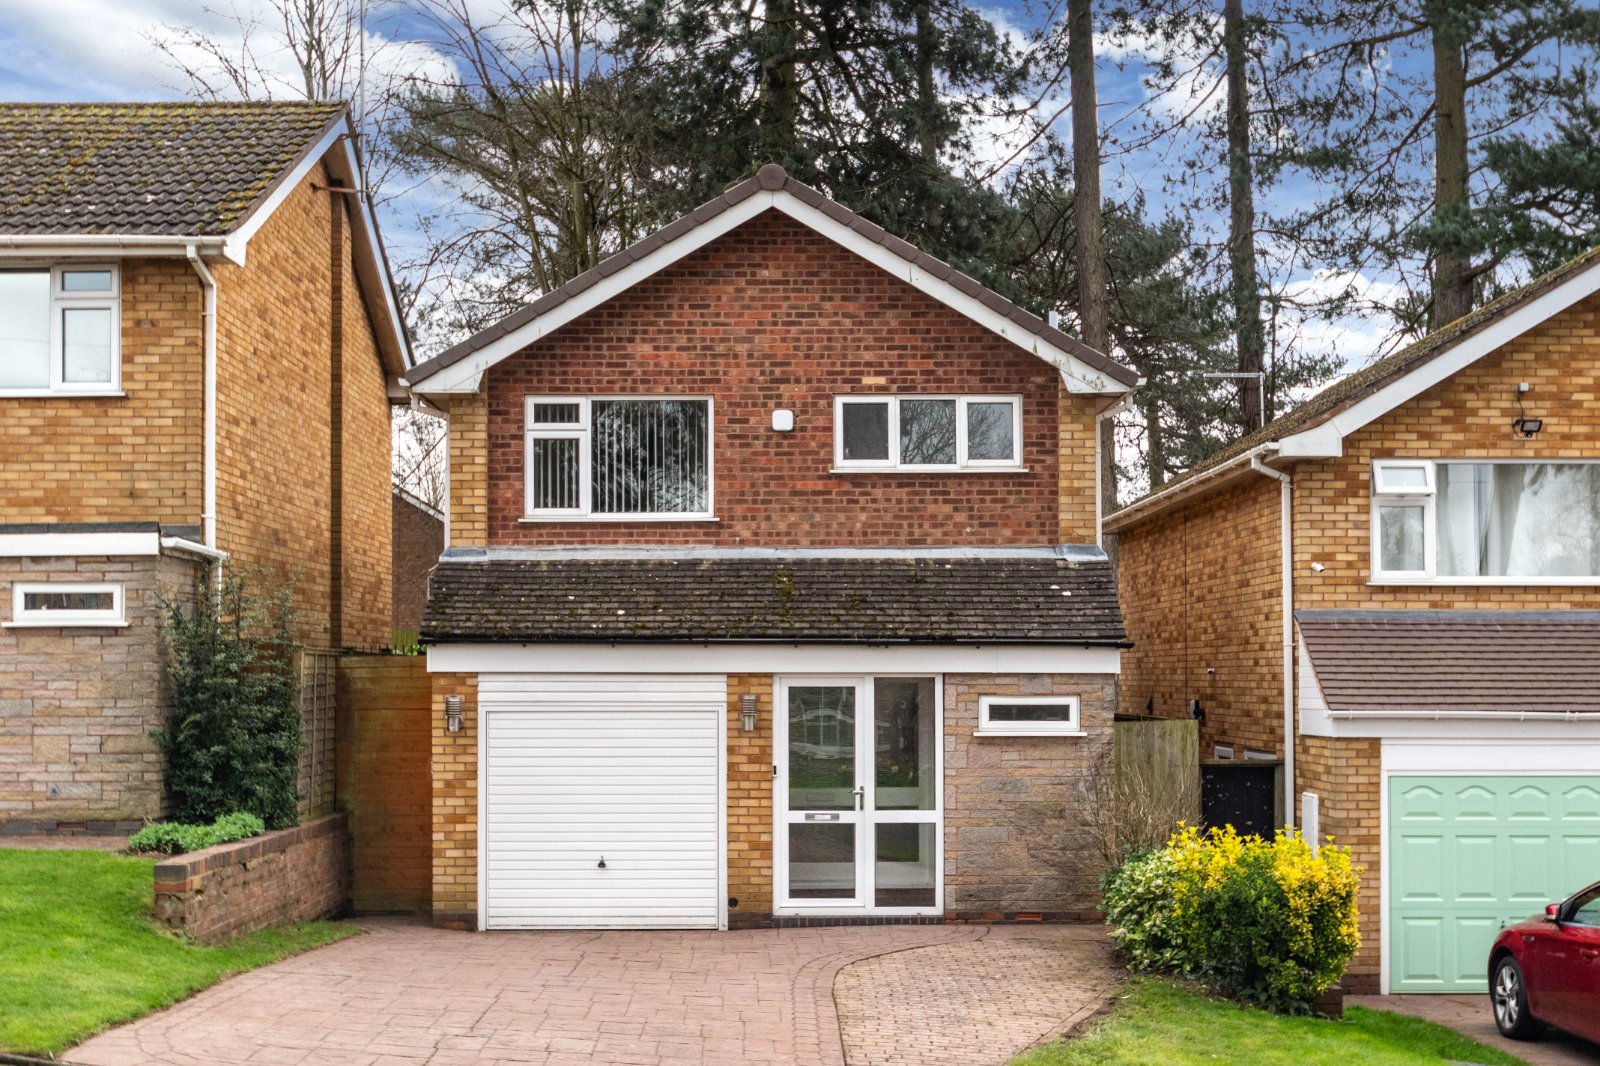 3 bed house for sale in Pineview, Birmingham - Property Image 1